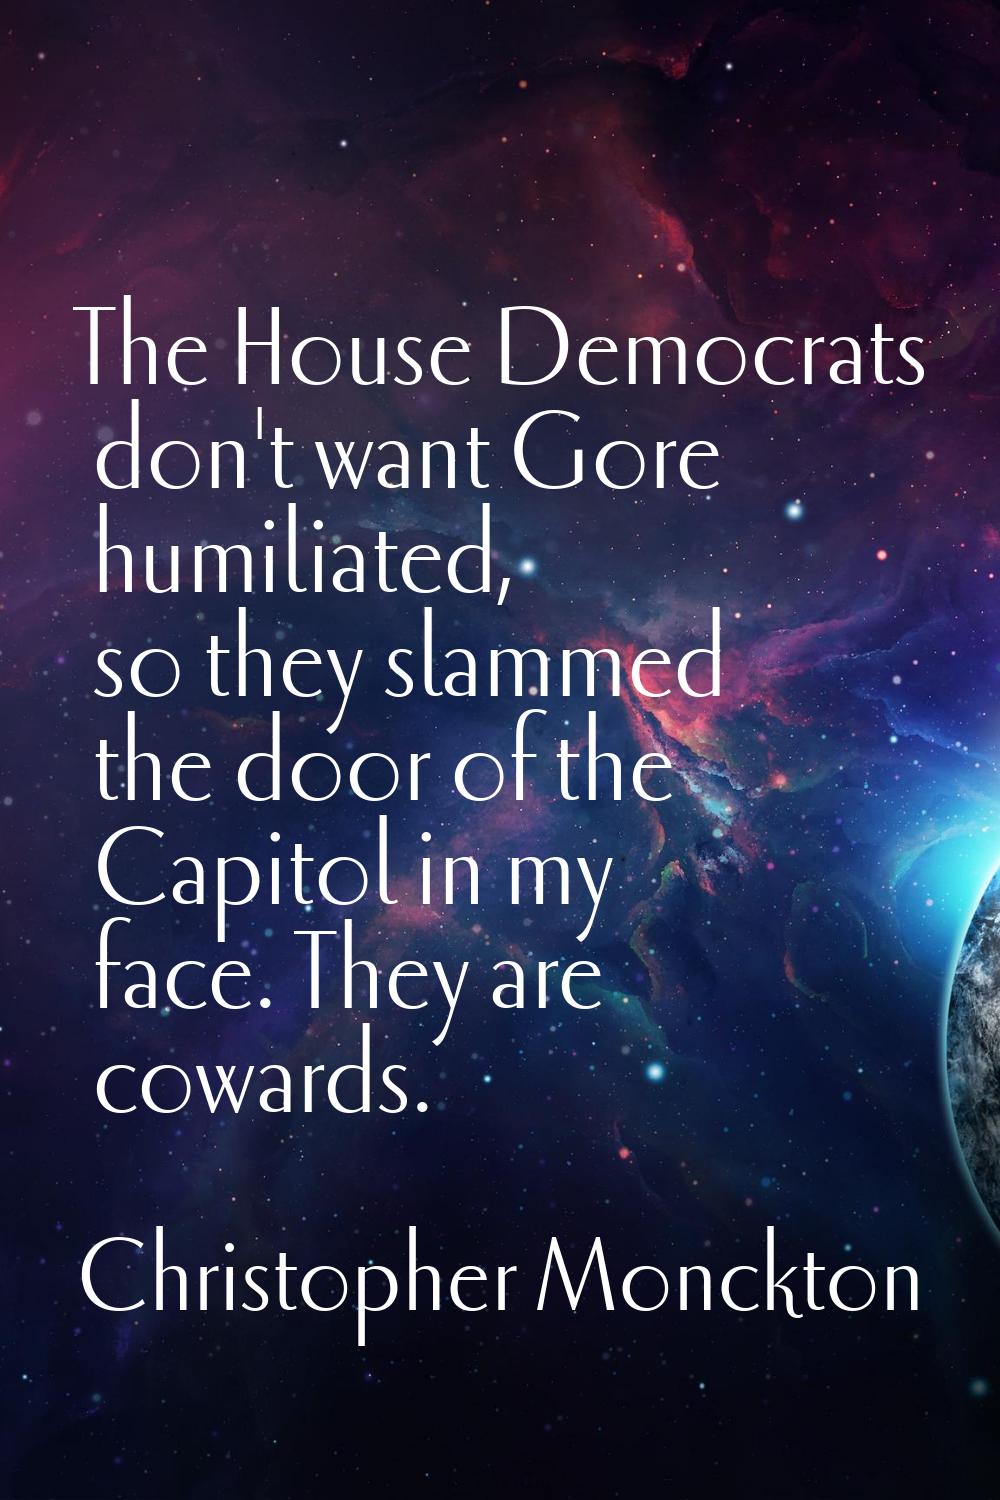 The House Democrats don't want Gore humiliated, so they slammed the door of the Capitol in my face.